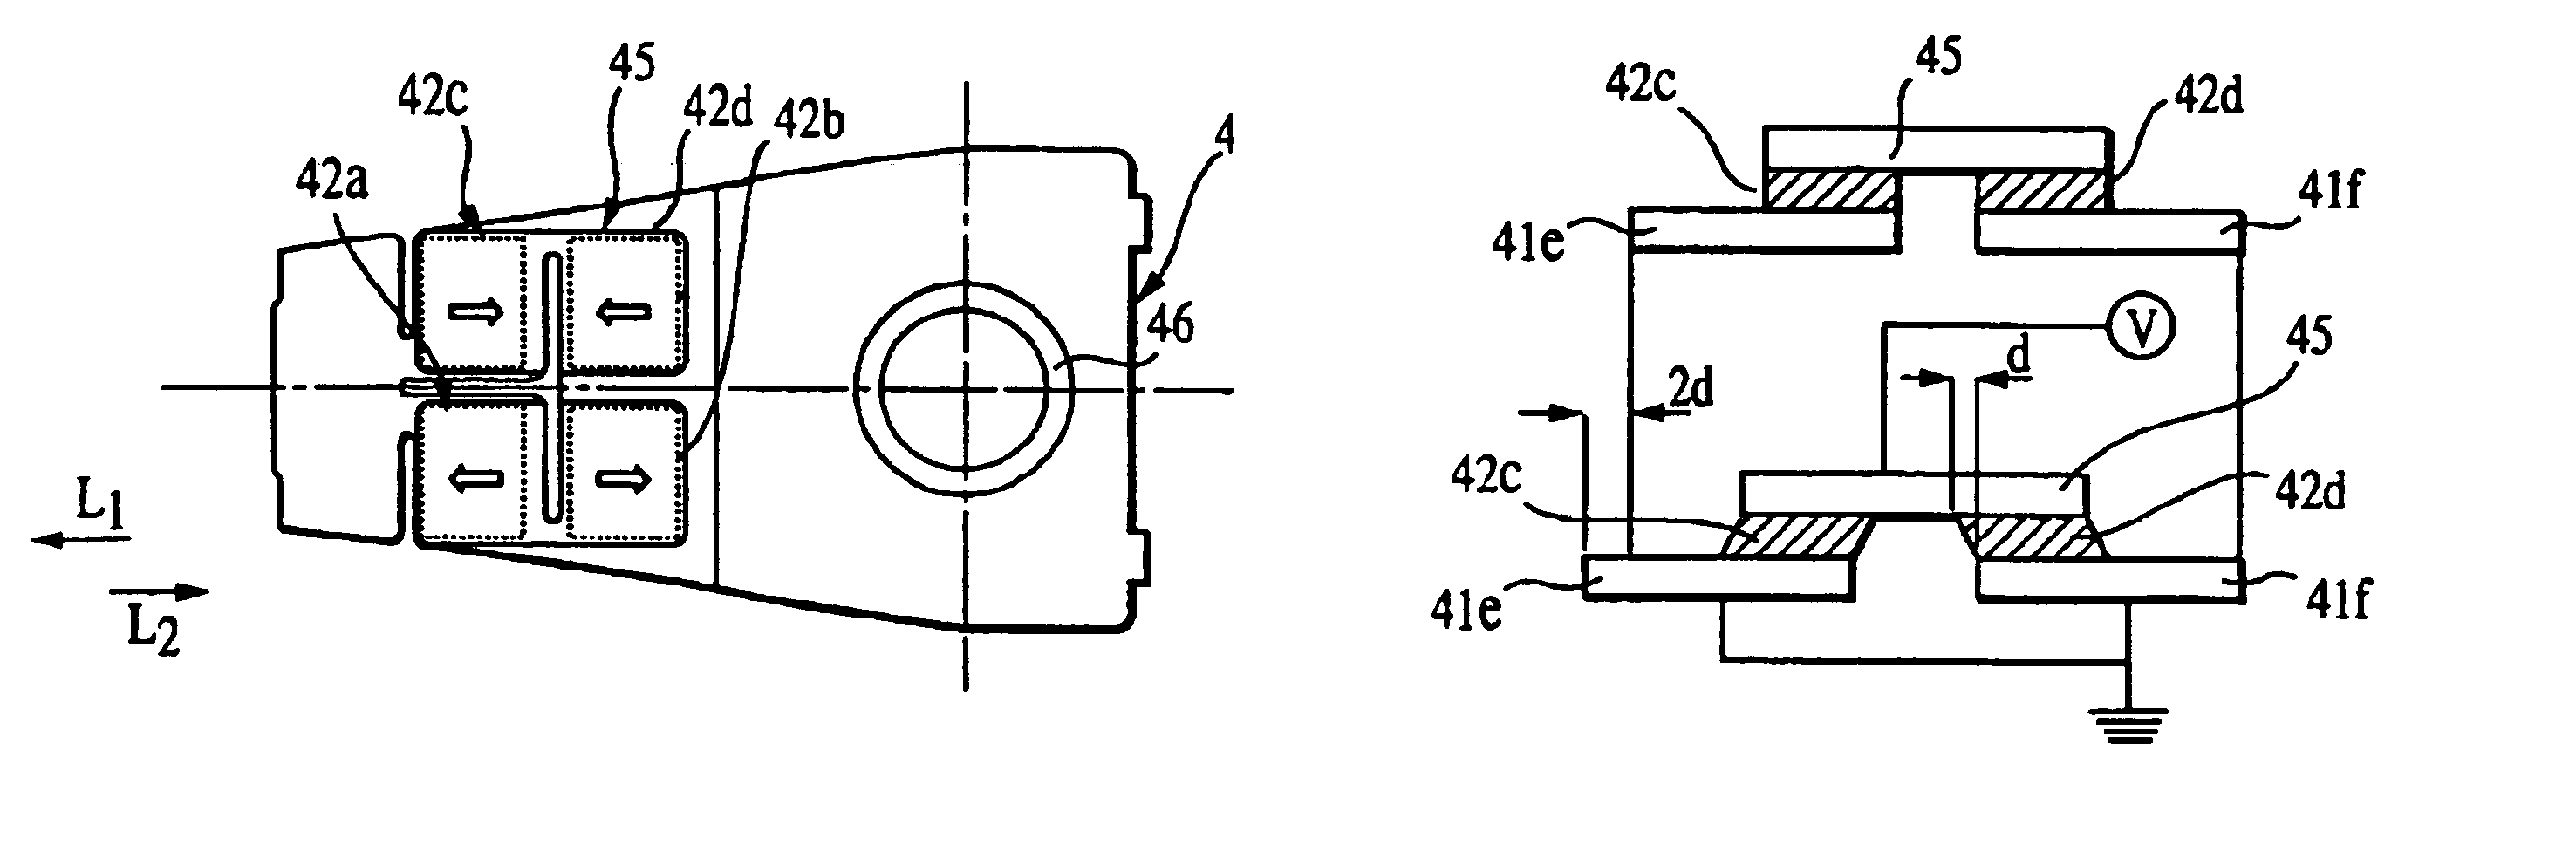 Disc drive magnetic head fine positioning mechanism including a base connecting a suspension to an arm, and having a piezoelectric drive element adjacent thereto